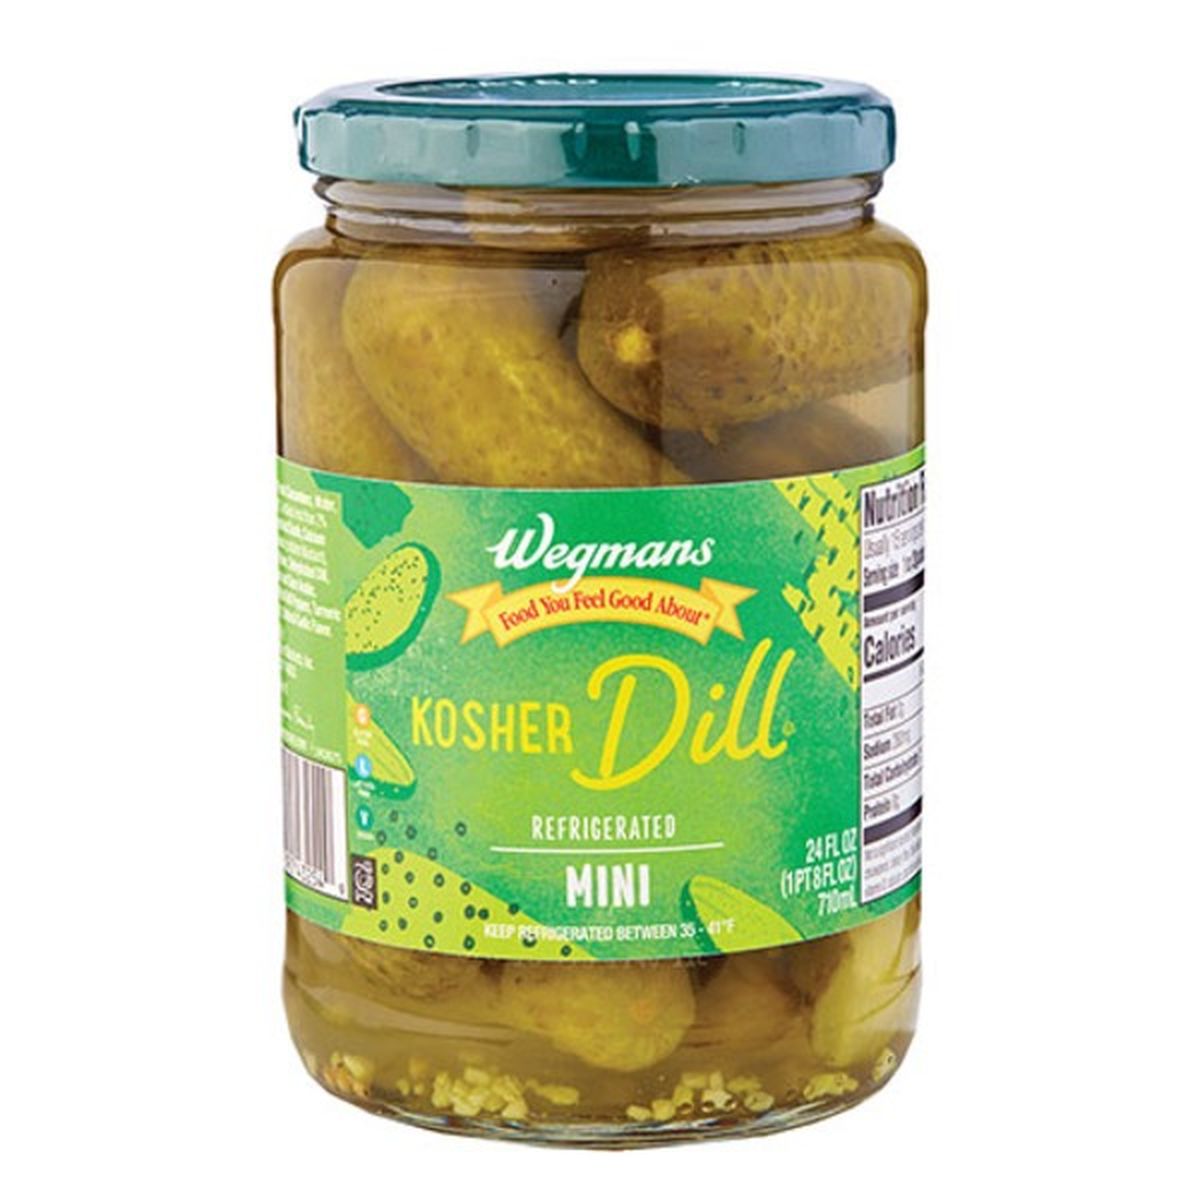 Calories in Wegmans Refrigerated Kosher Dill Mini Pickles